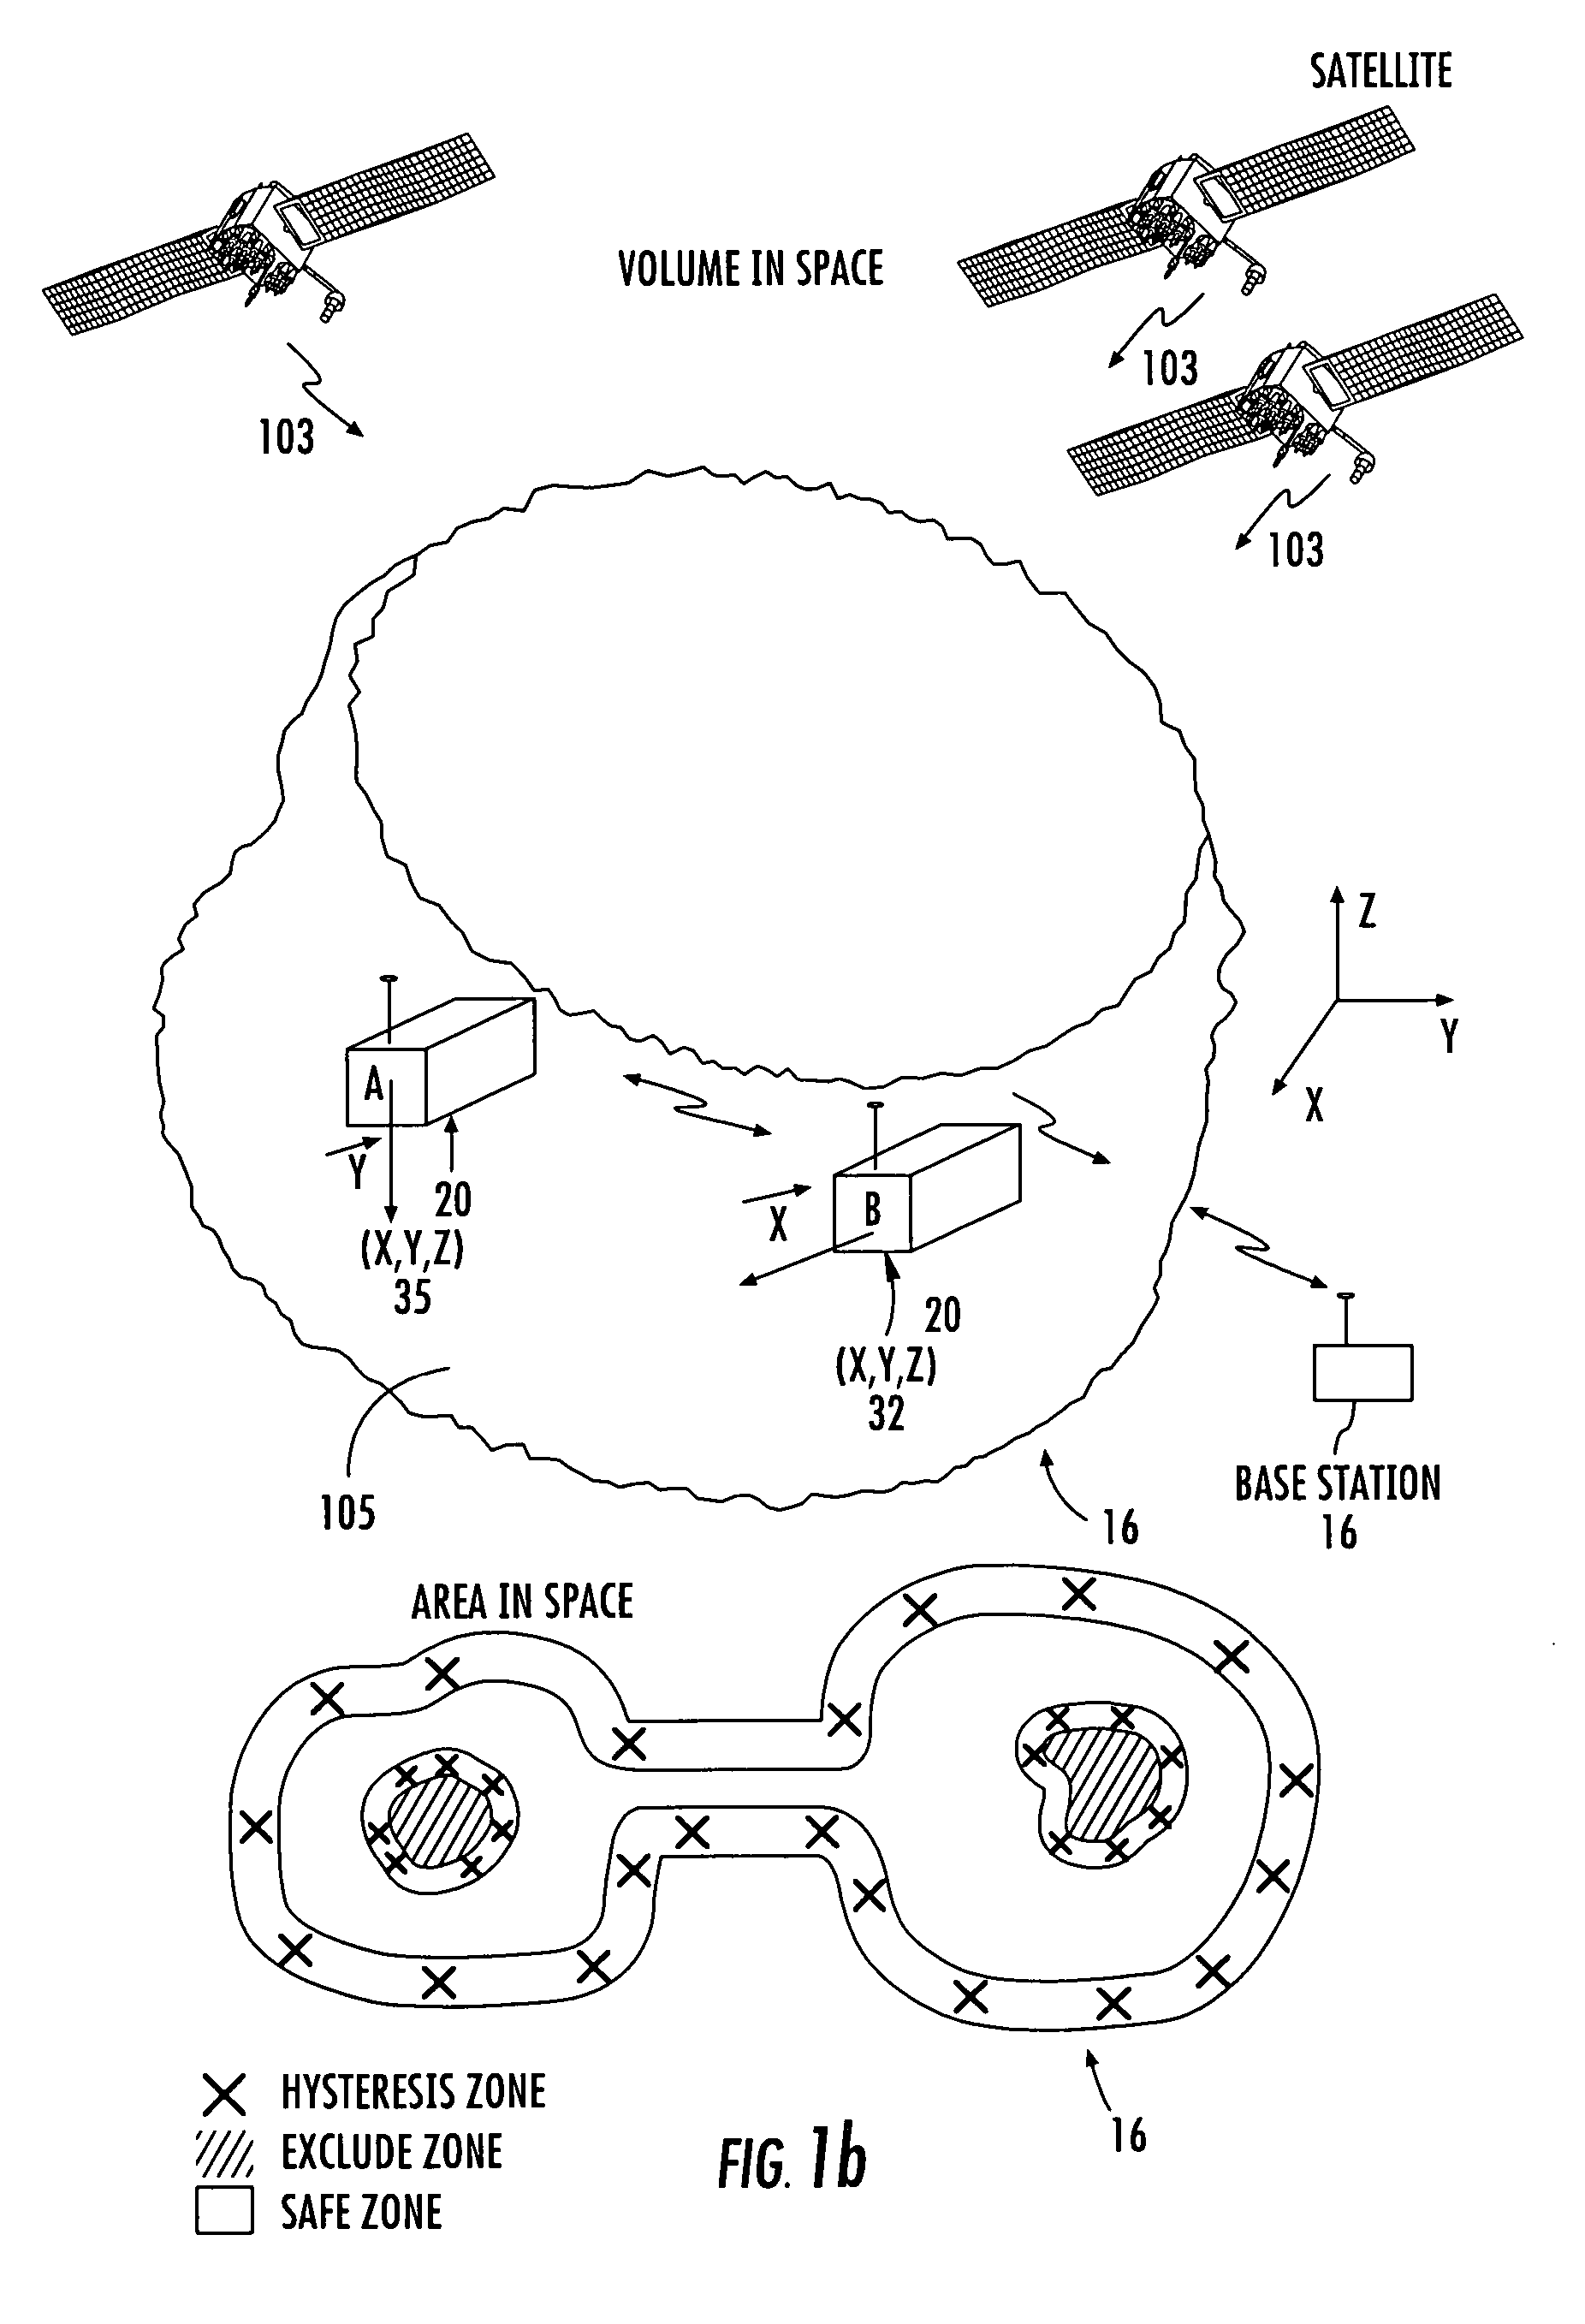 Large area position/proximity correction device with alarms using (D)GPS technology